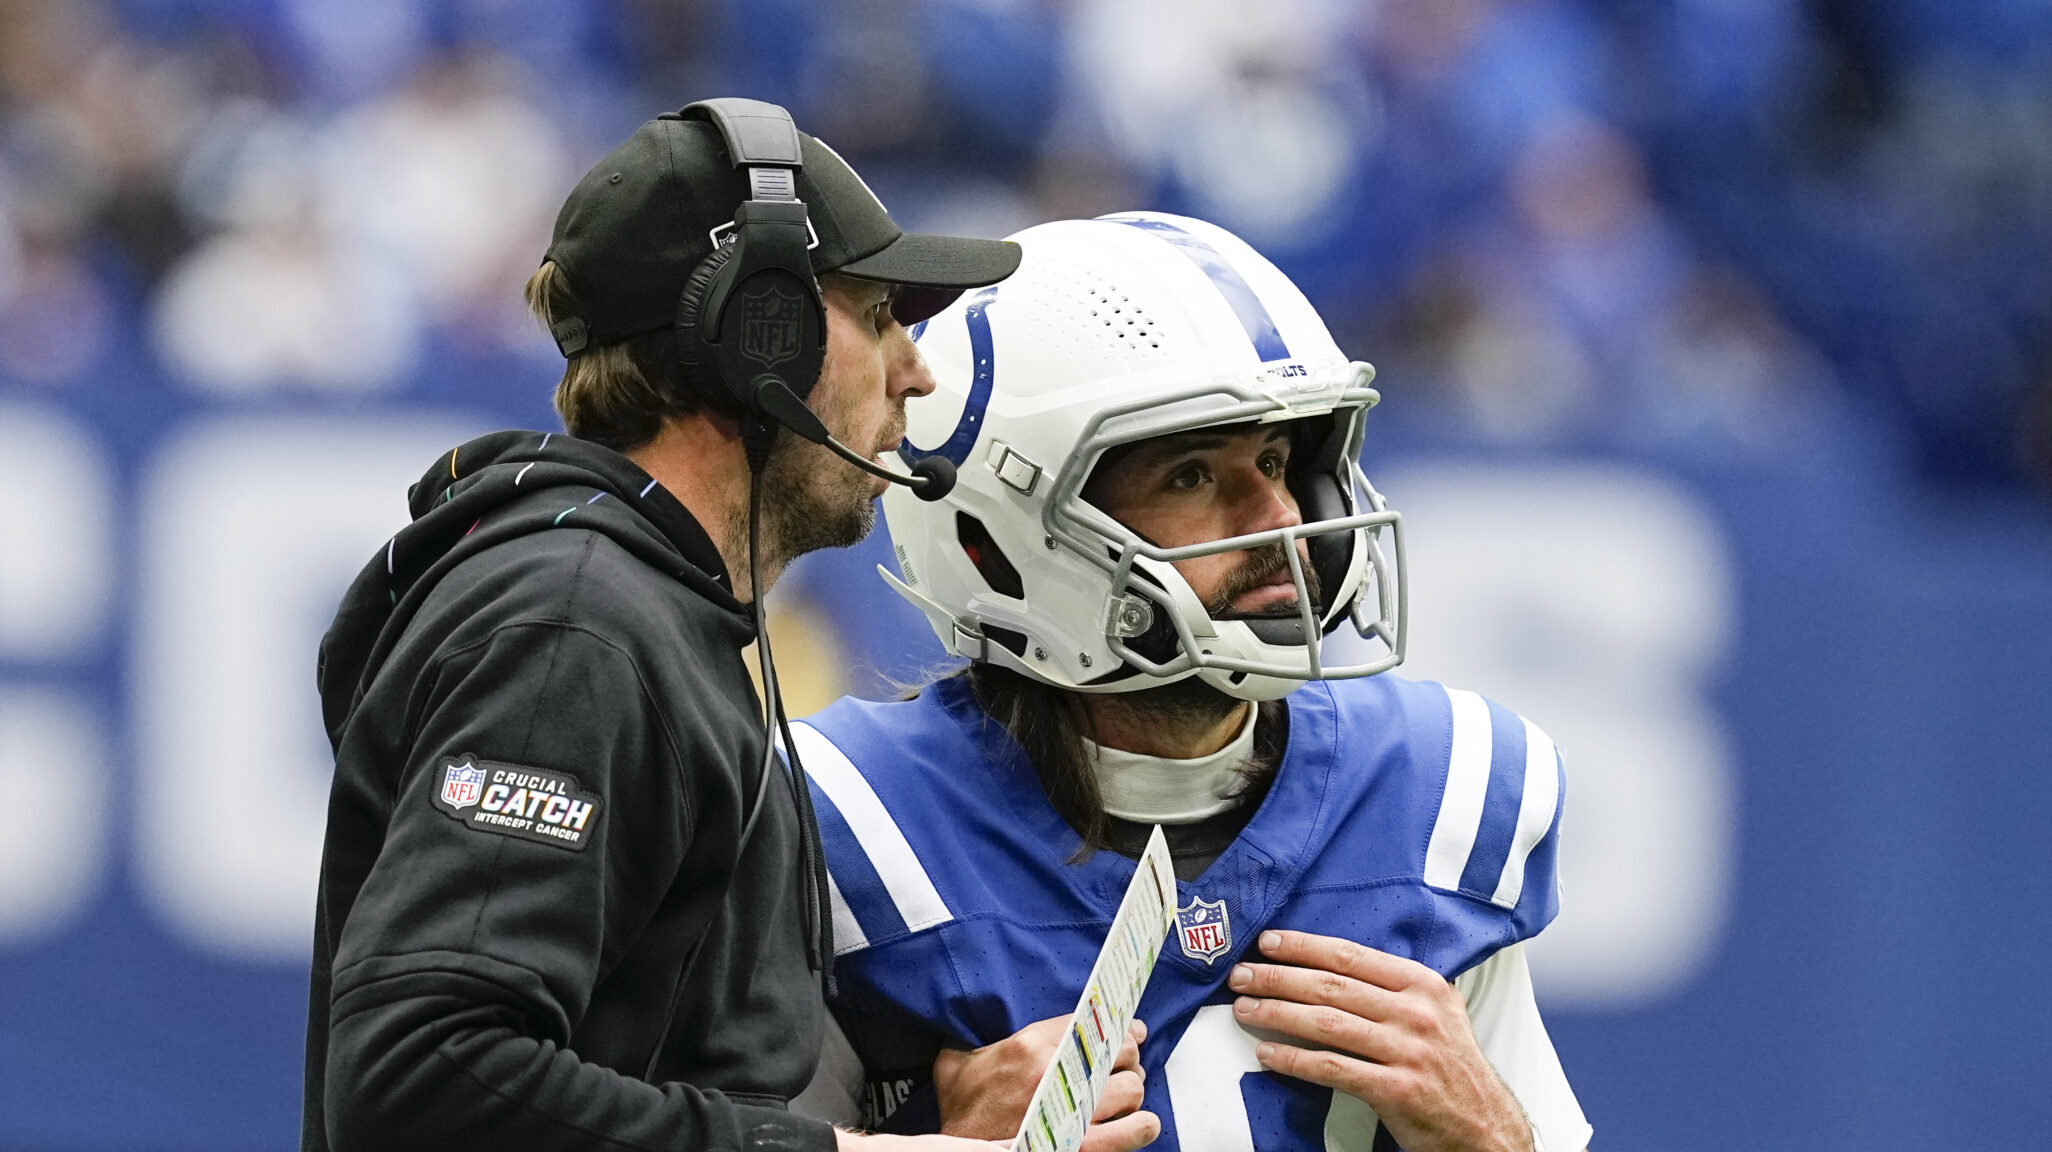 Shane Steichen is the new Indianapolis Colts head coach